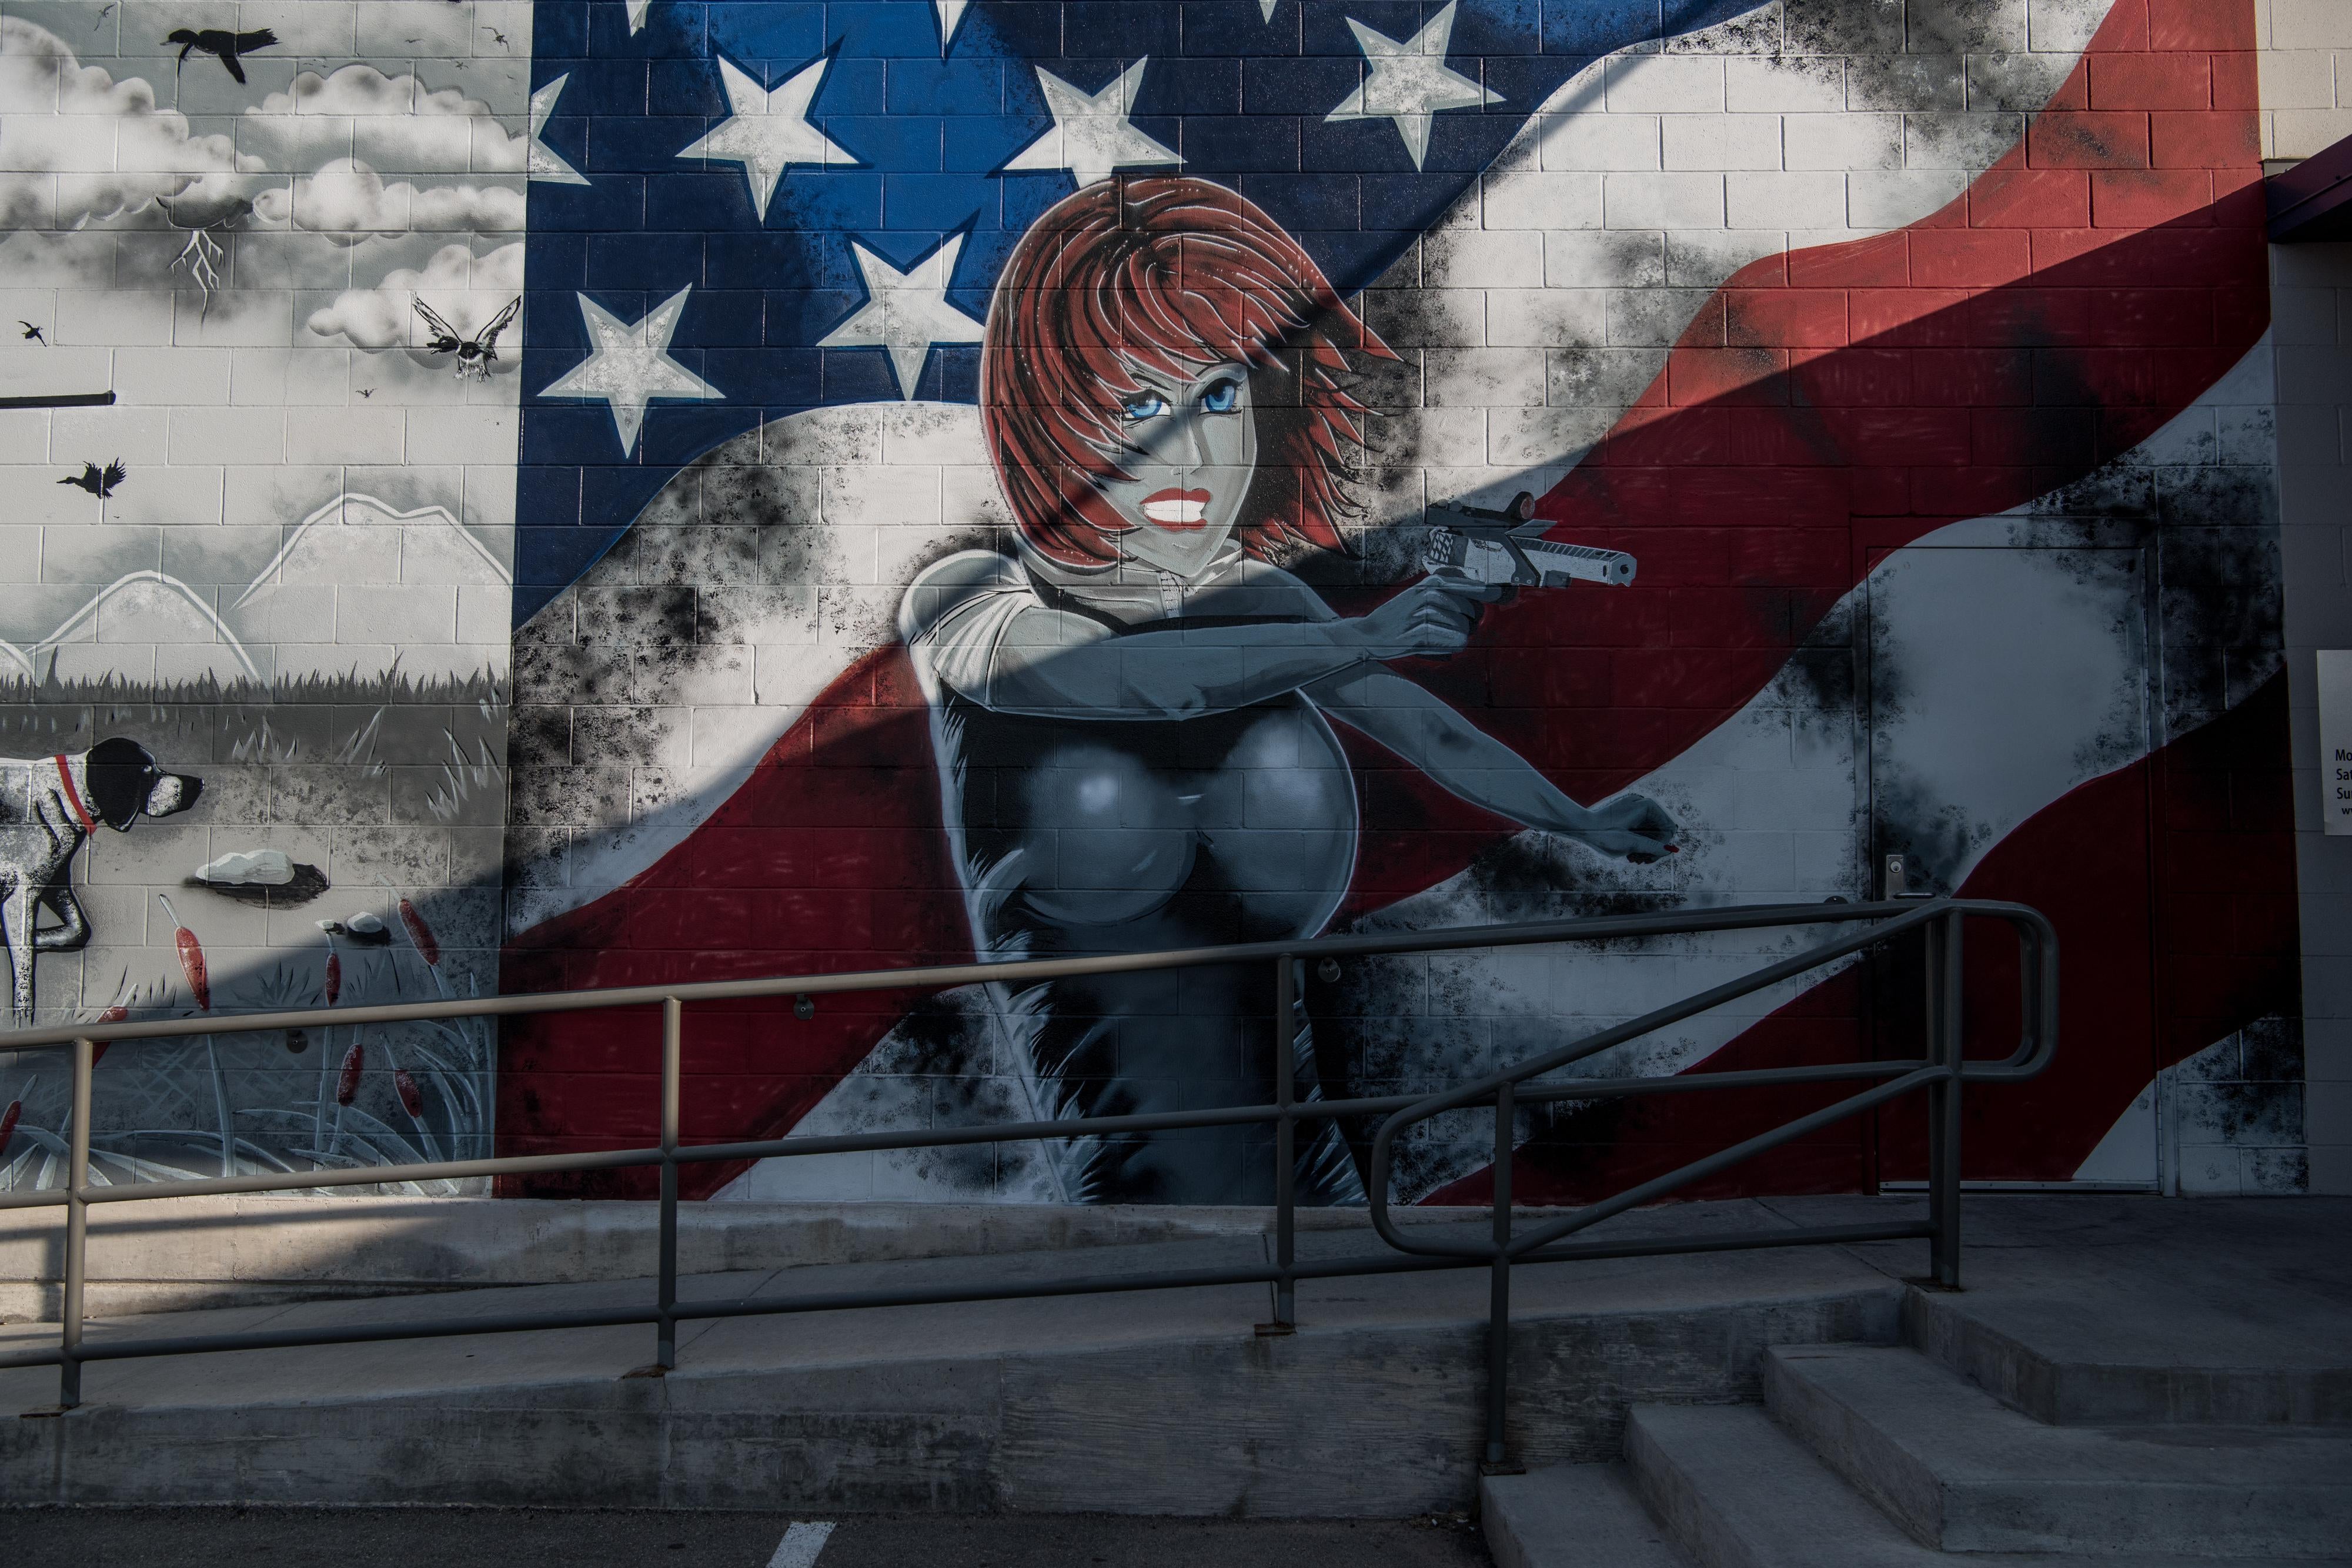 A mural on a wall outside a gun range following a deadly shooting spree on September 1, 2019 in Odessa, Texas. 